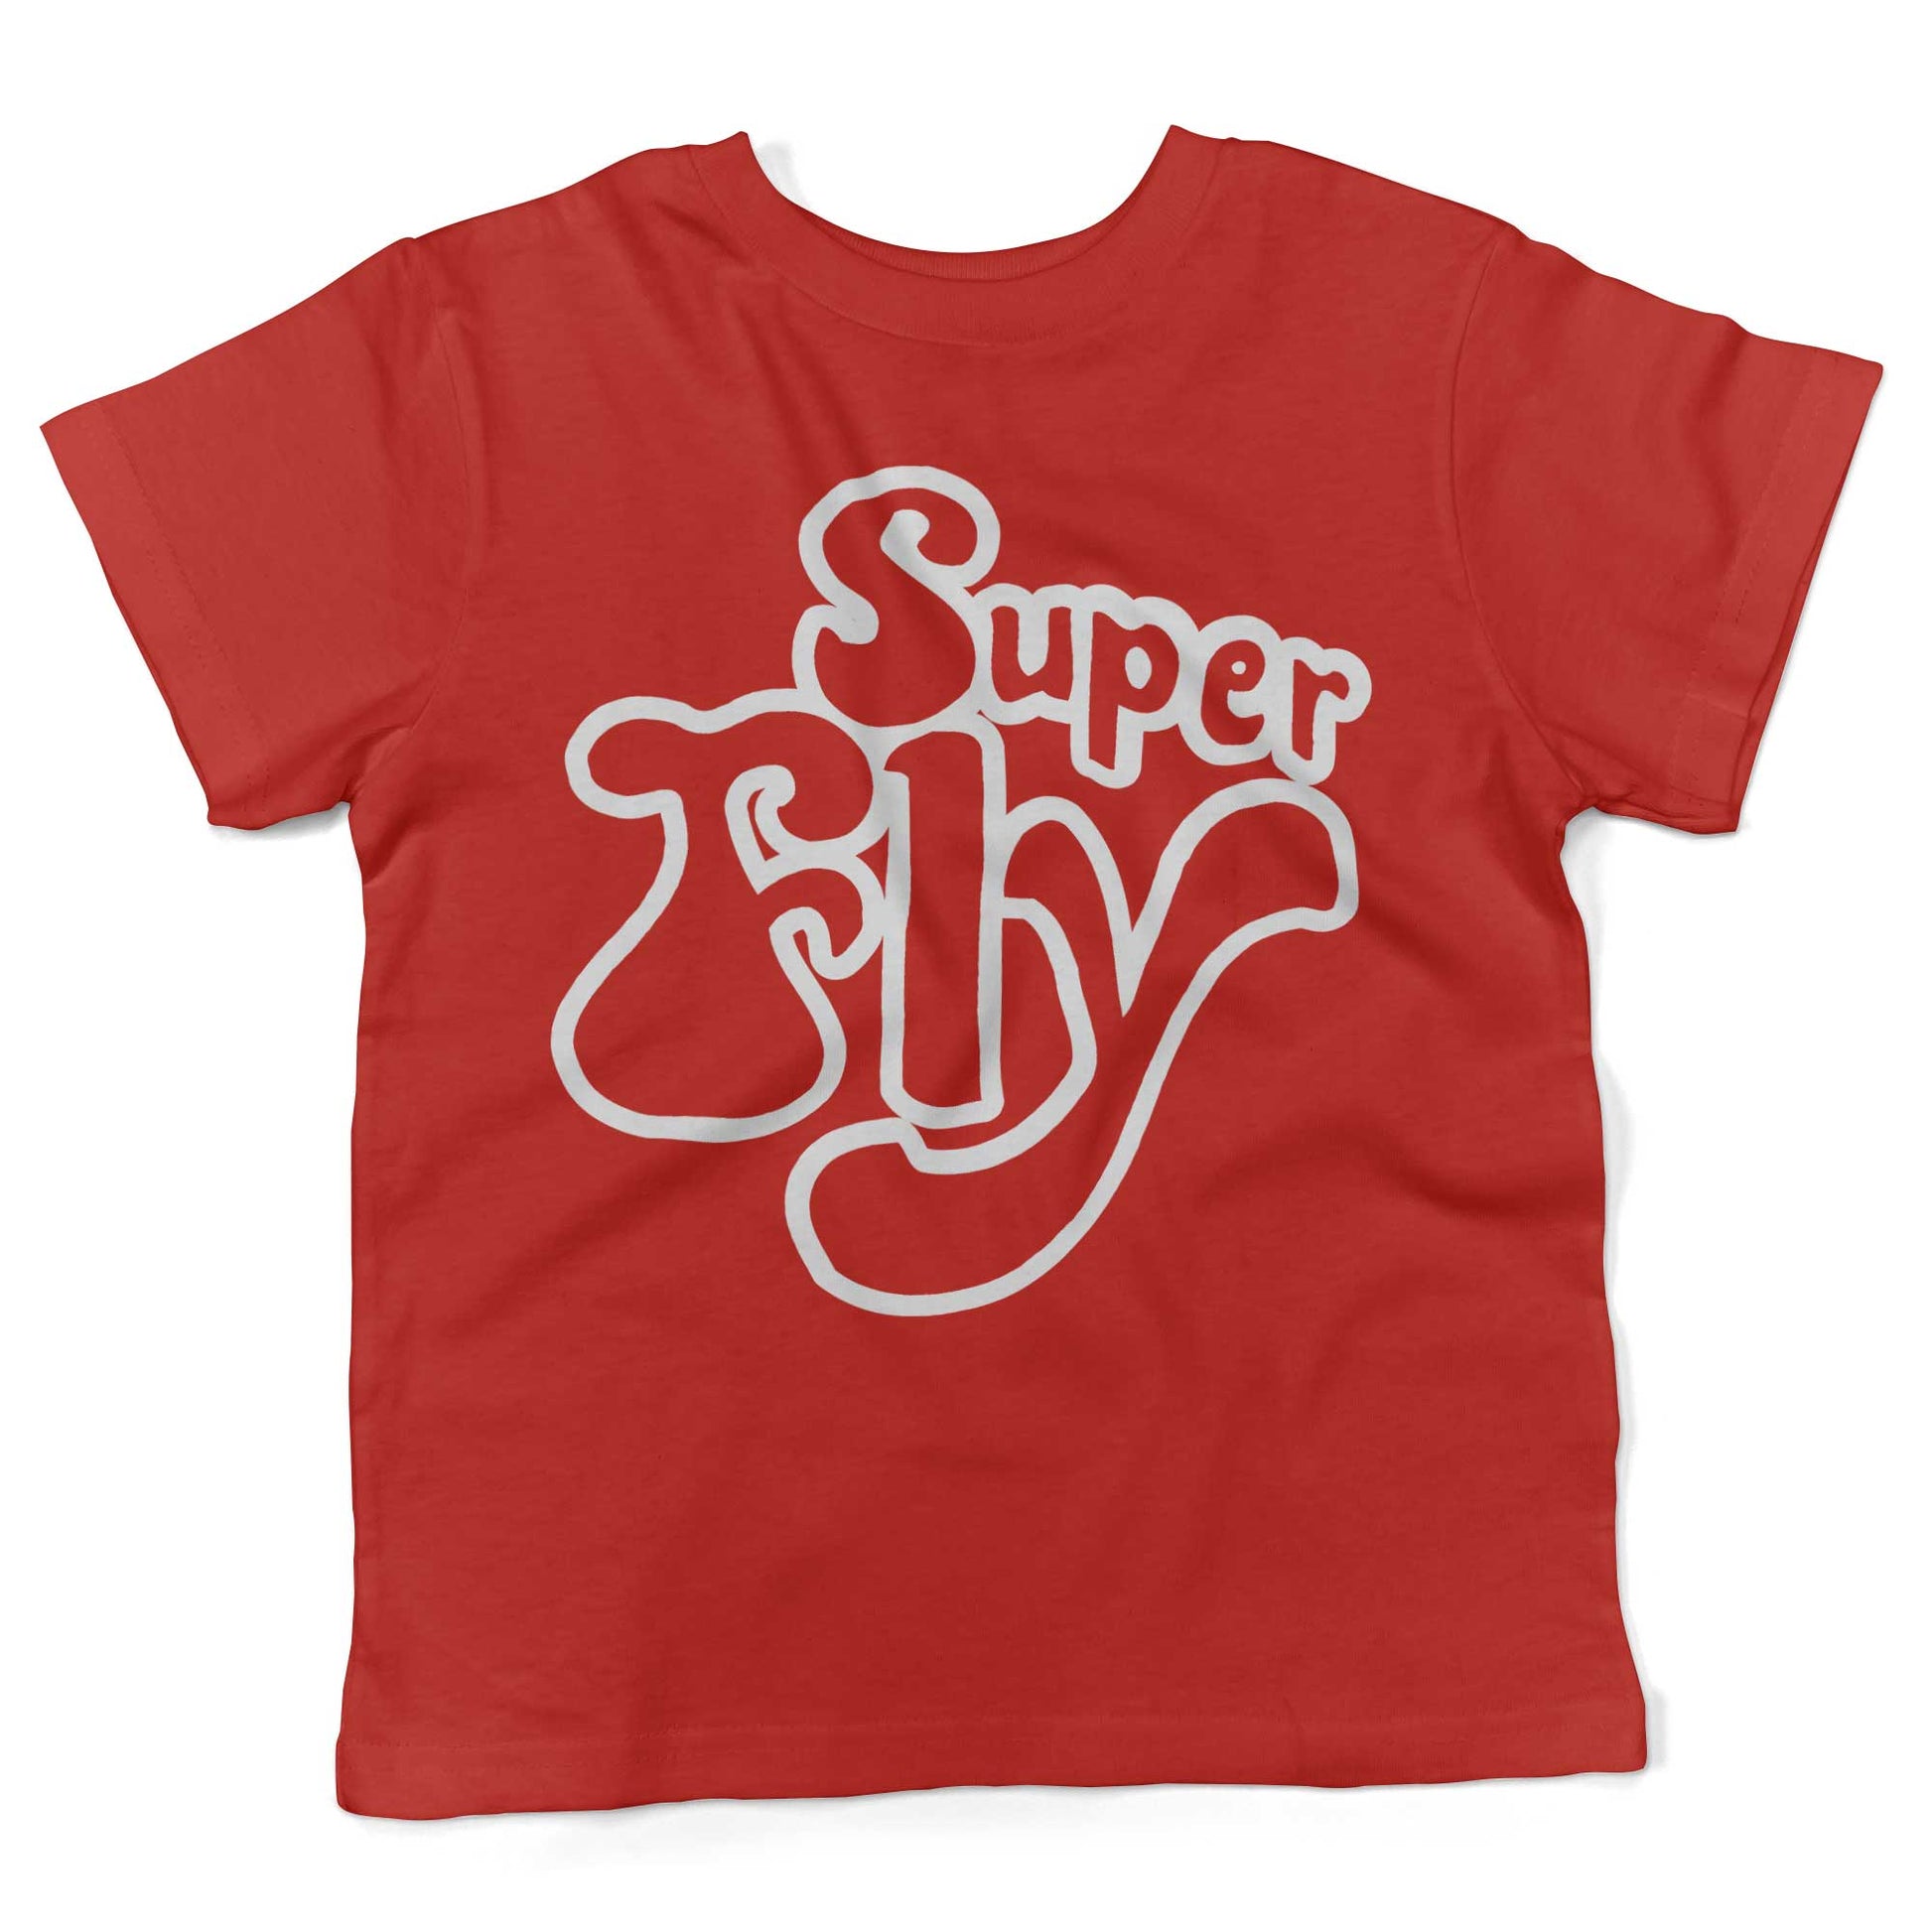 Superfly Toddler Shirt-Red-2T